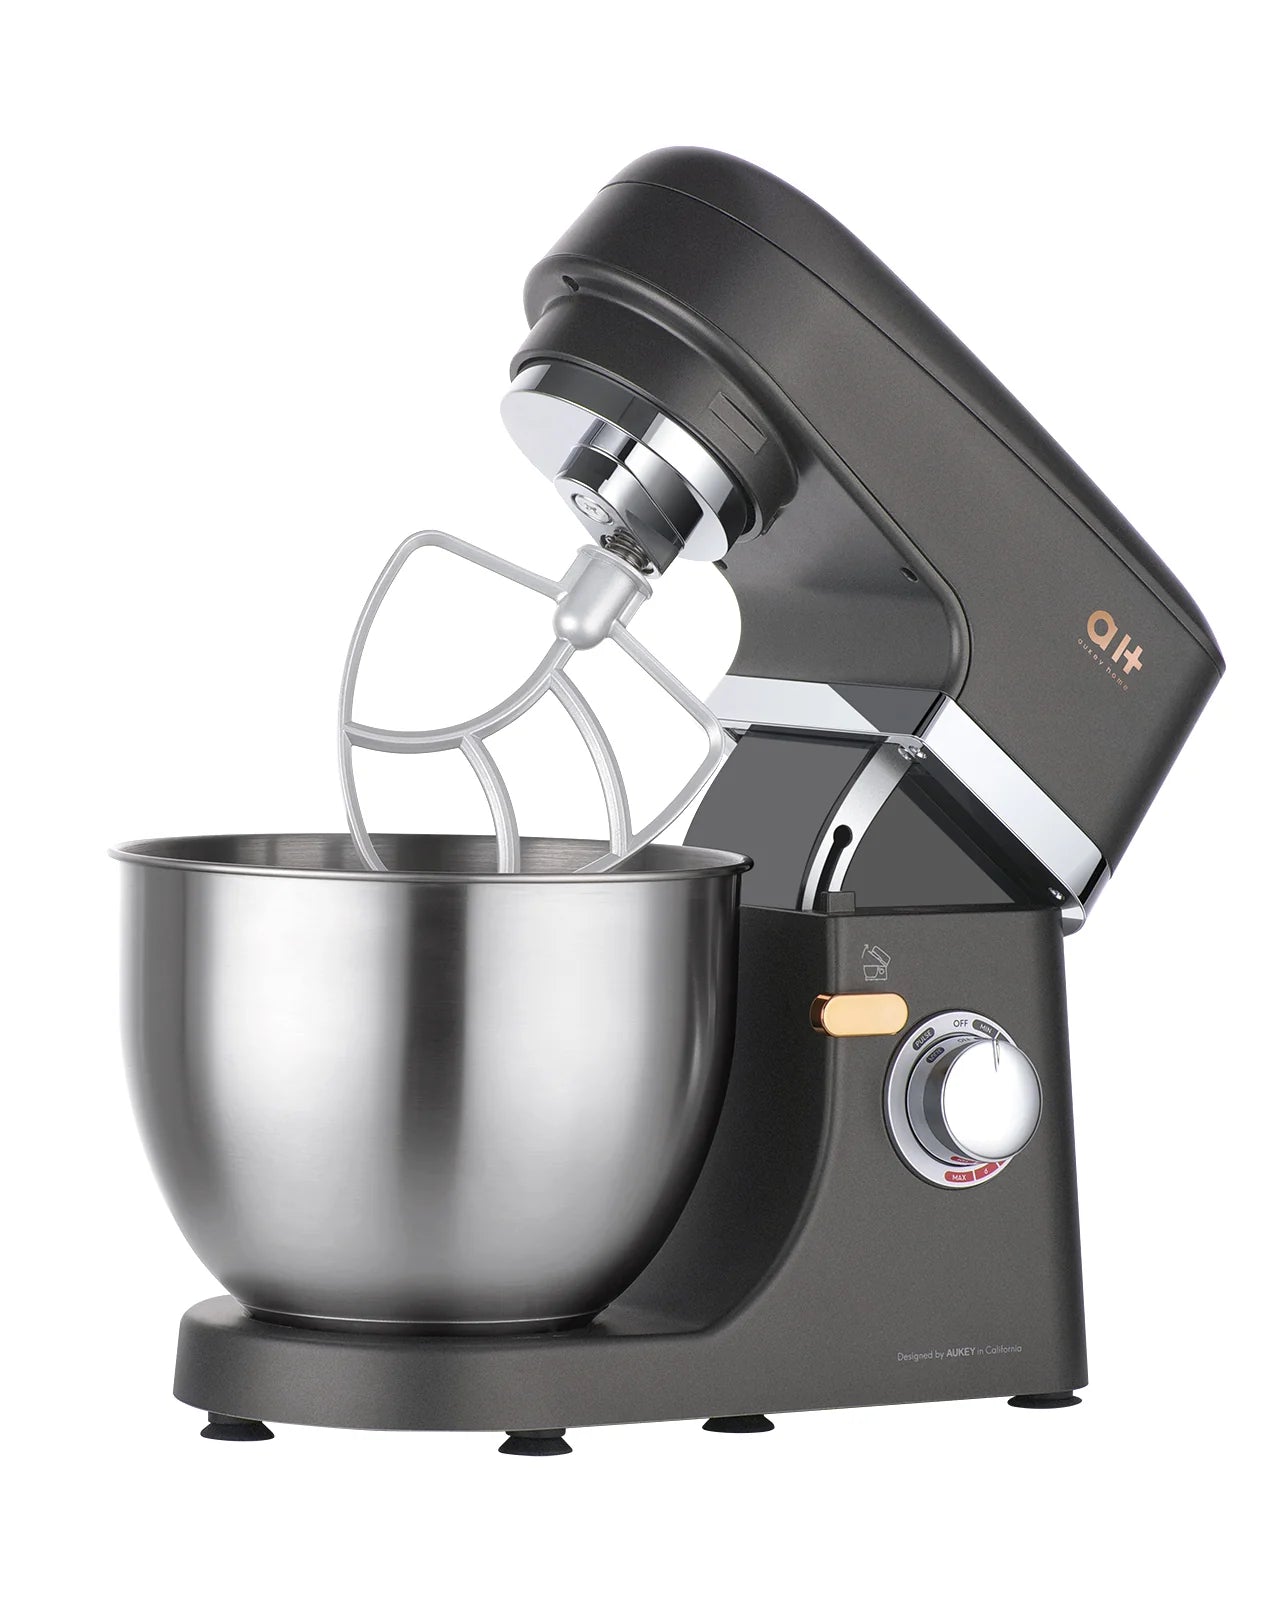 Aukey Home 600W Stand Mixer 9 Speed Tilt-Head with 5Qt Stainless Steel Bowl, Planetary Mixing System, Dough Hook, Flat Beater, Whisk, Splash Guard, Dishwasher Safe, Grey